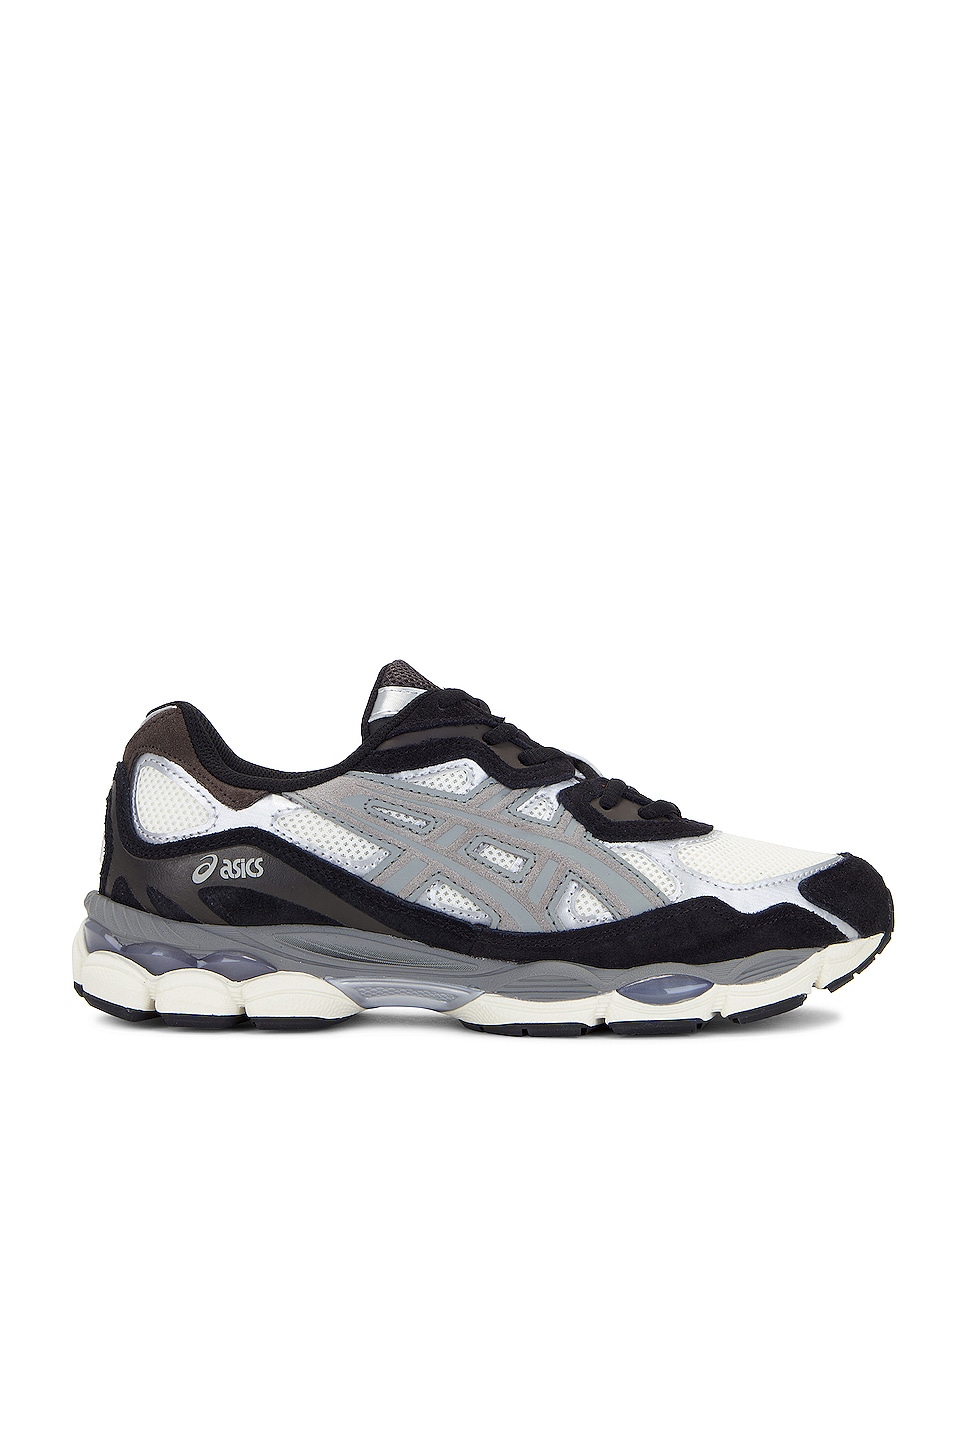 Image 1 of Asics Gel-nyc Sneaker in Ivory & Clay Grey